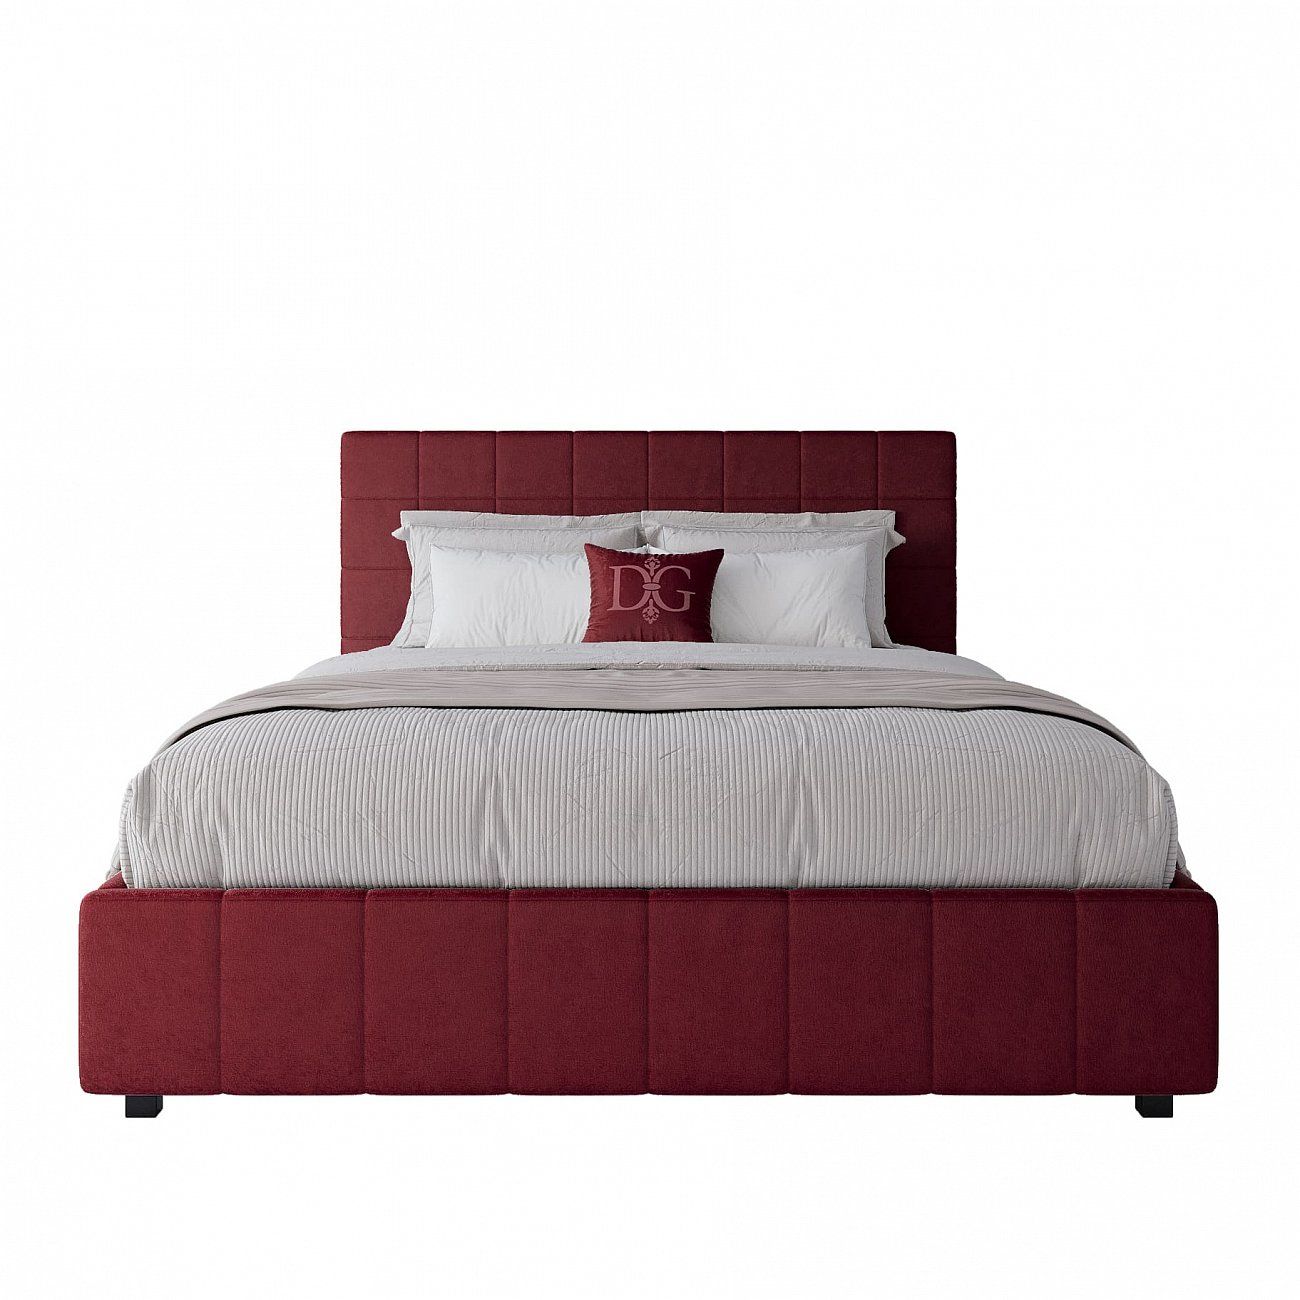 Double bed 160x200 cm red Shining Modern